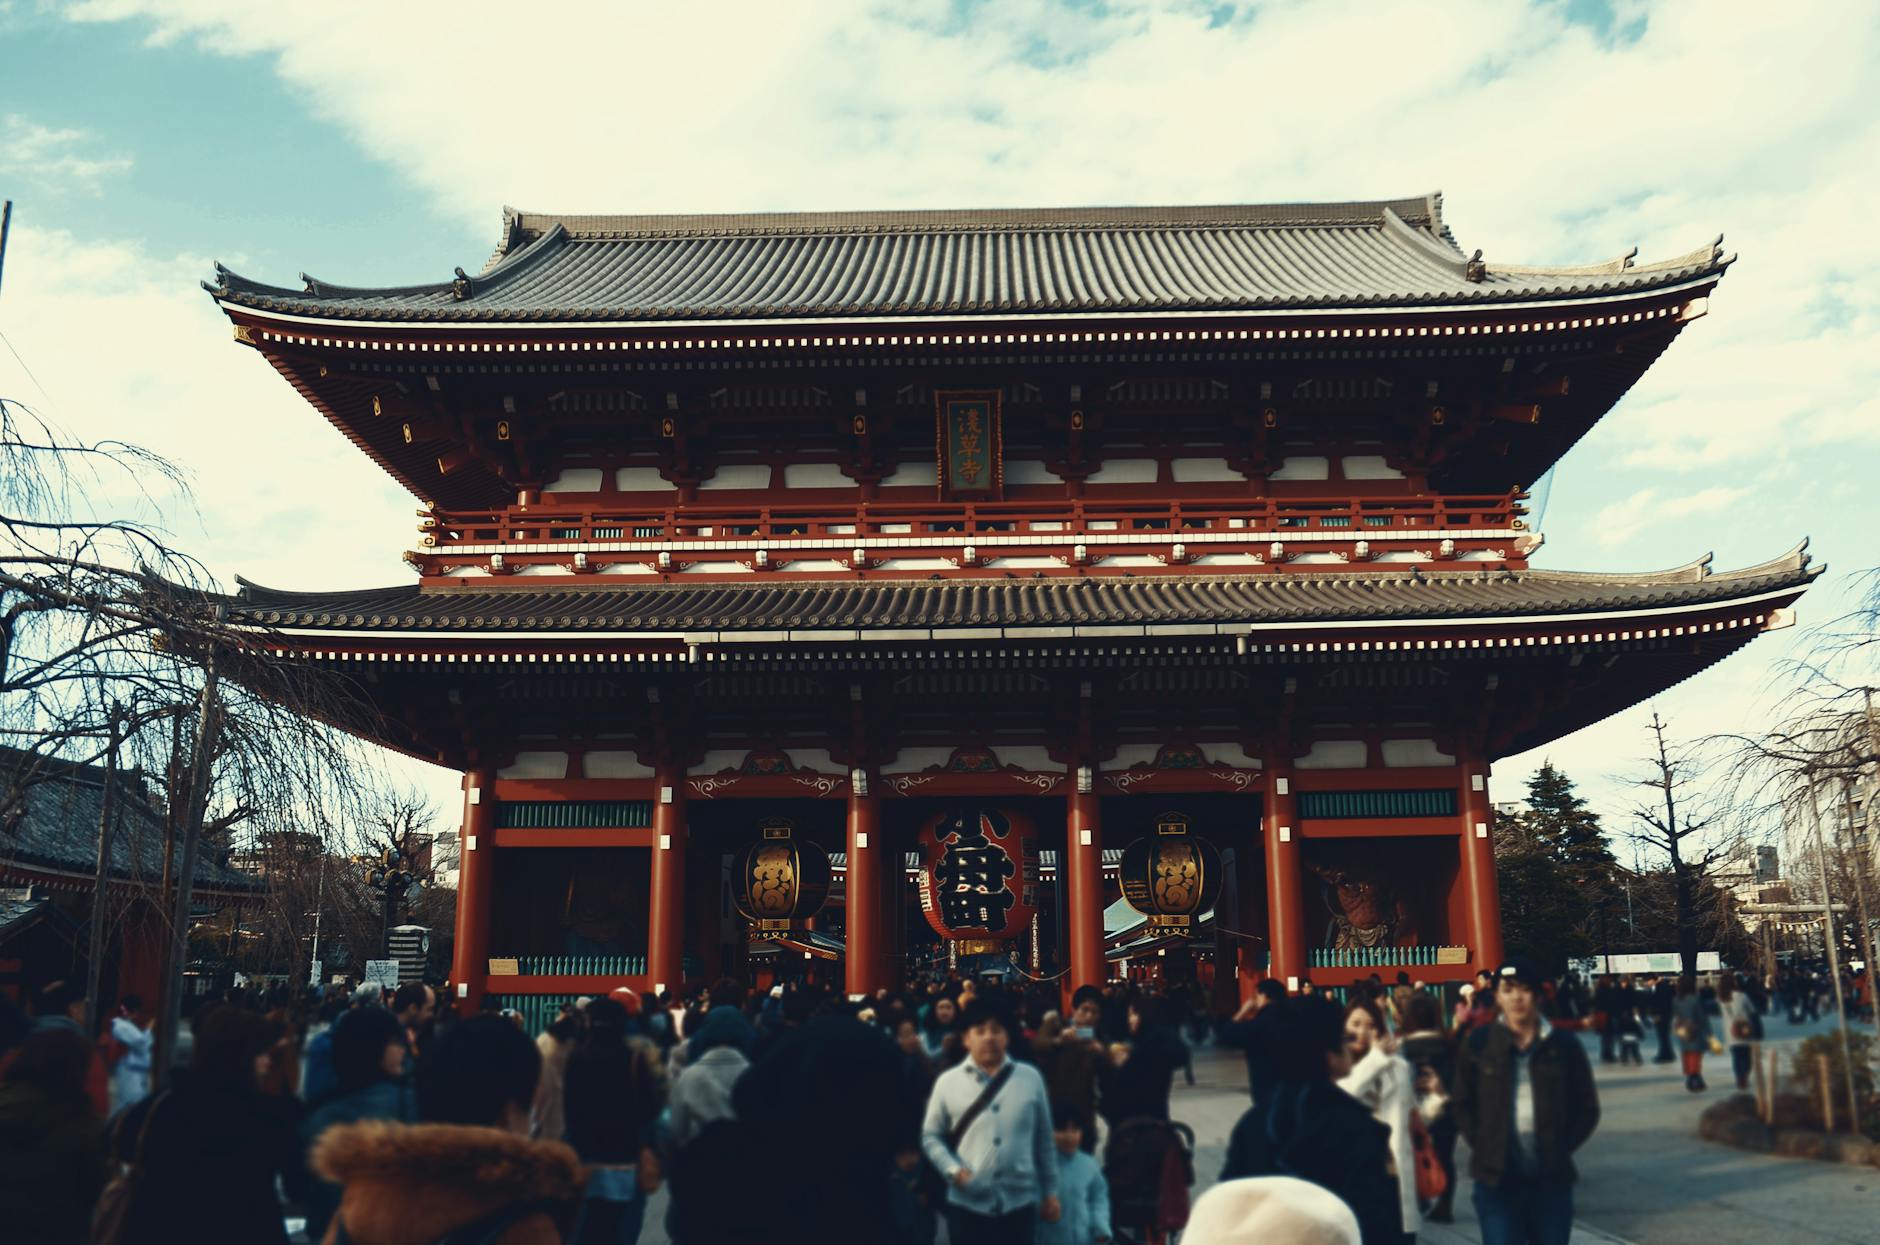 Photo of People in Temple, Japan